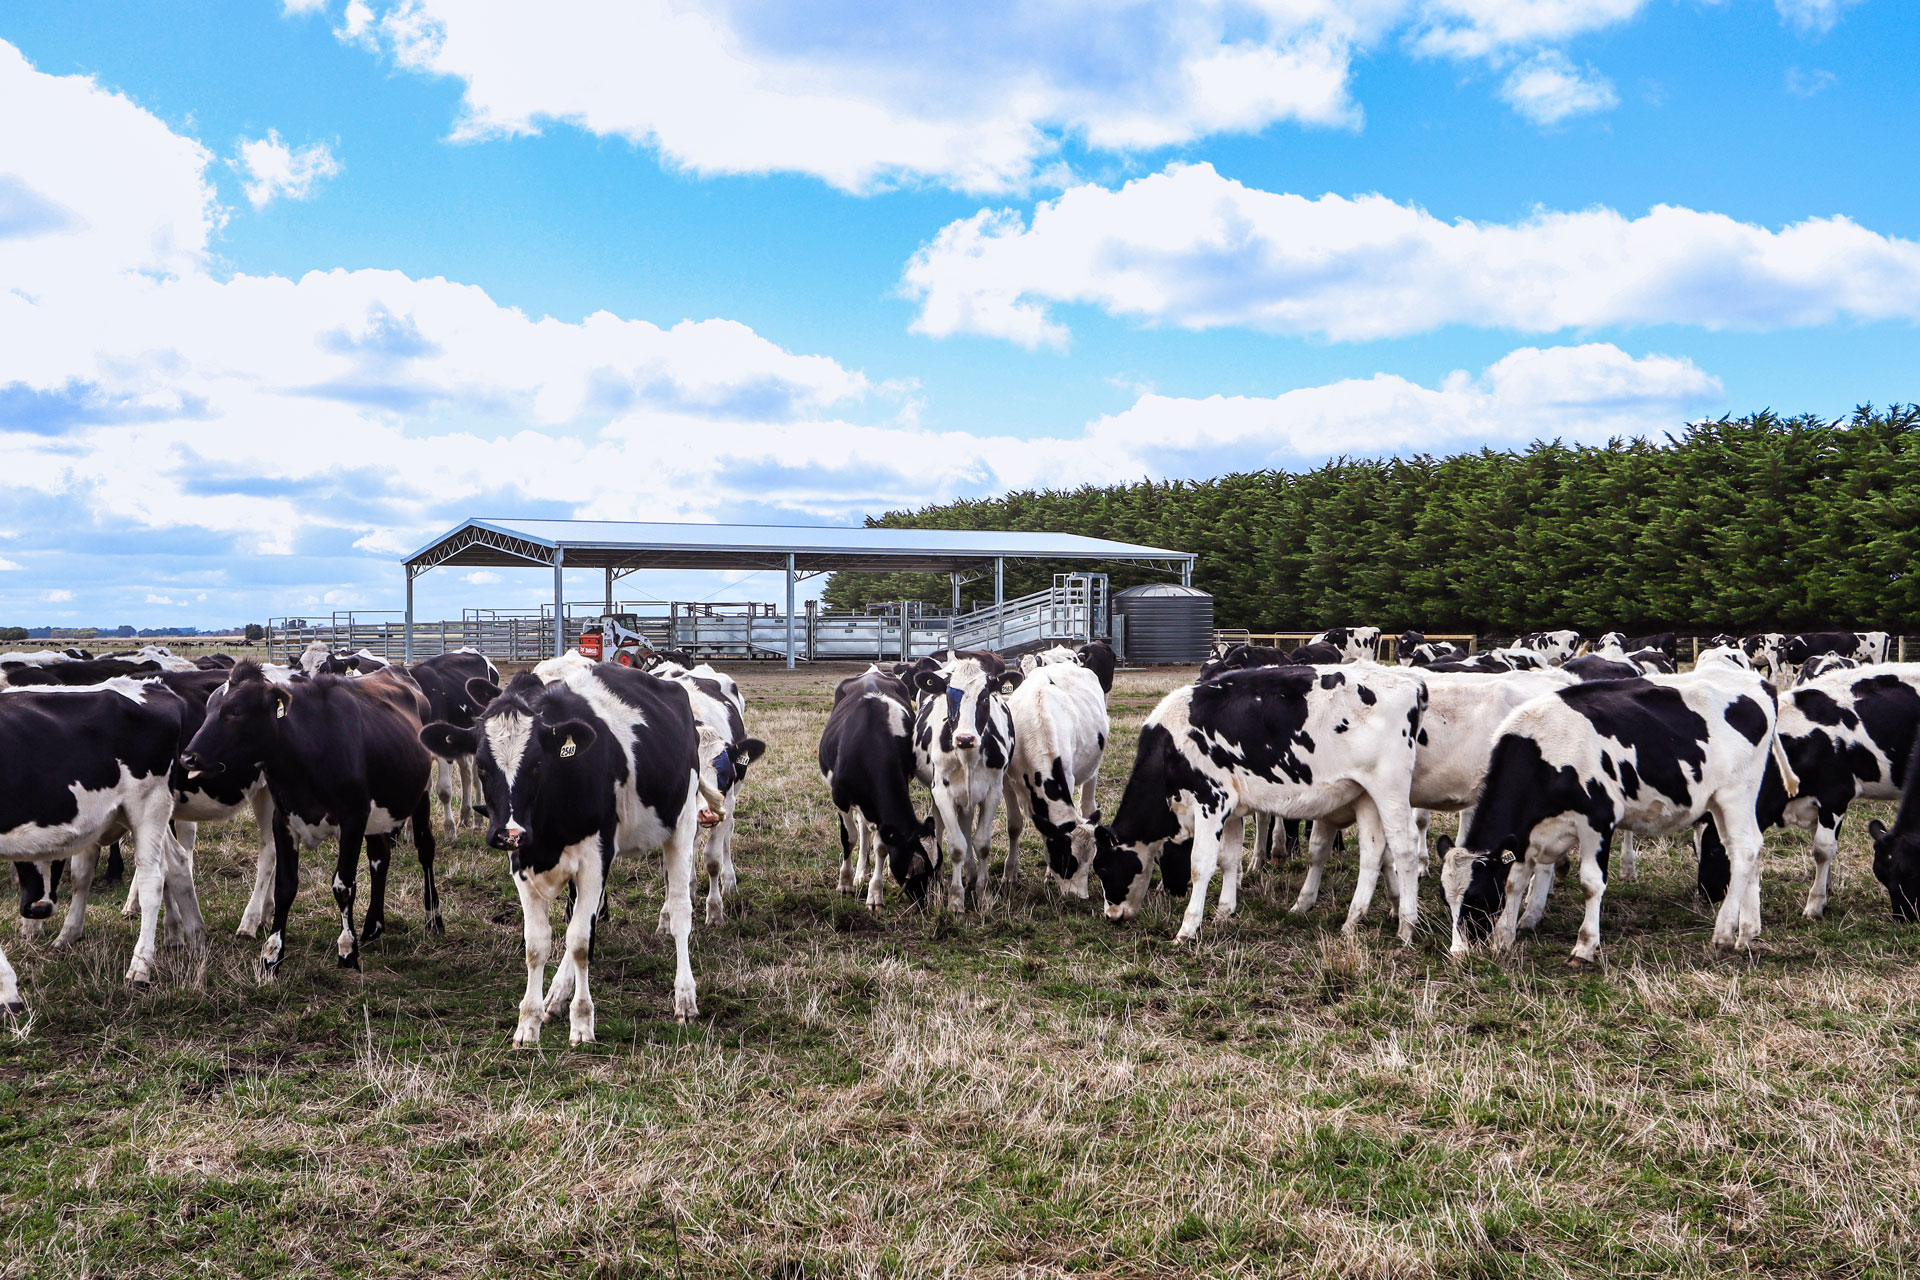 What Are The Benefits Of Covering Cattle Yards